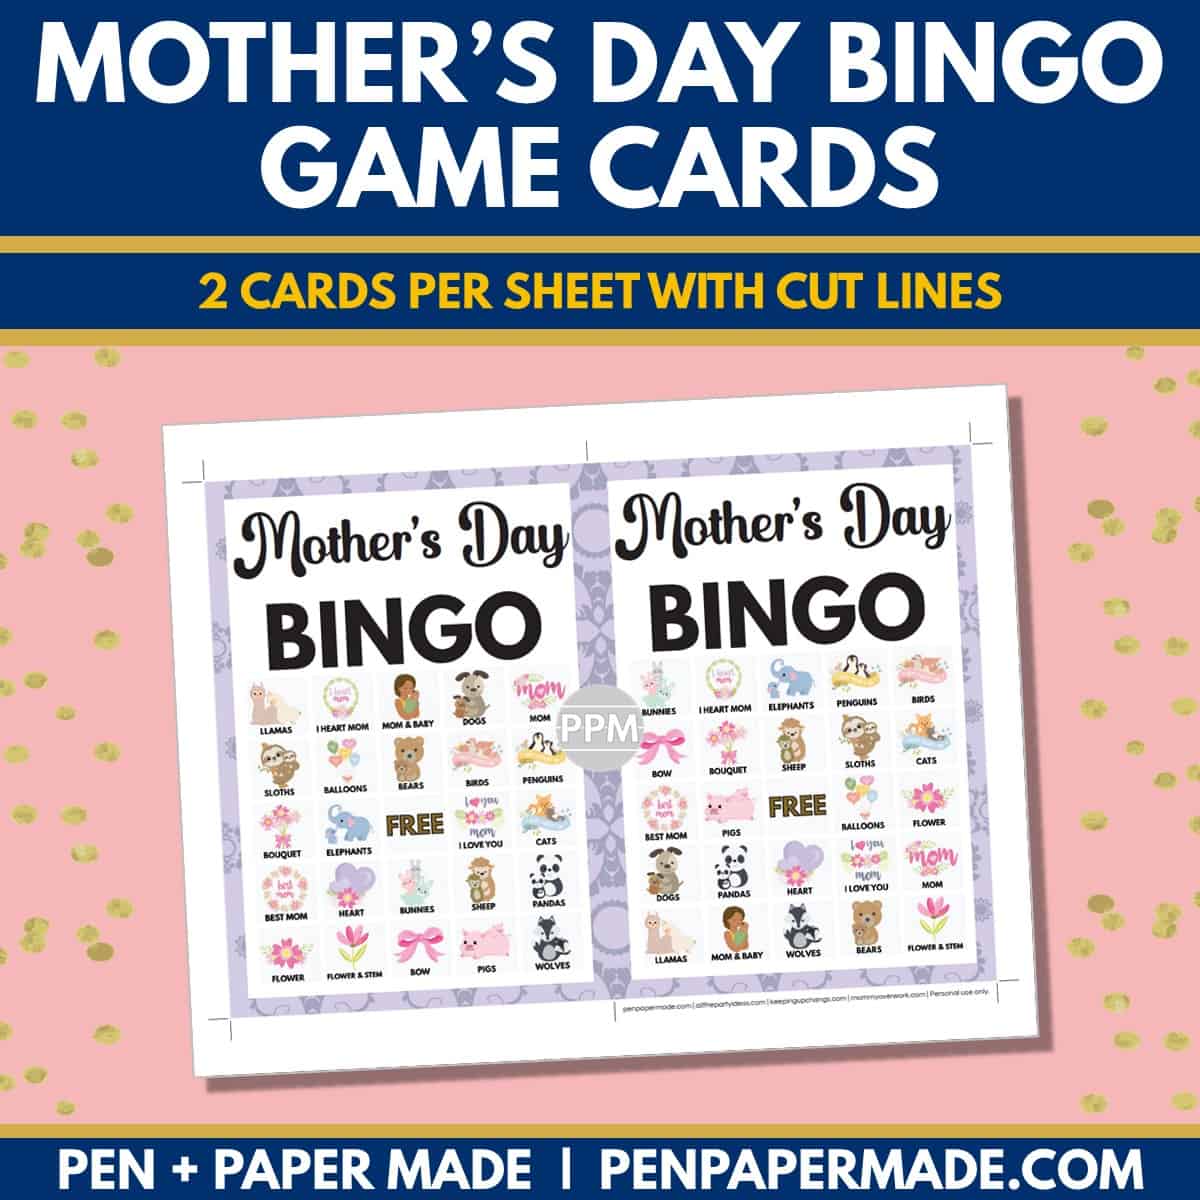 mother's day bingo card 5x5 5x7 game boards with images and text words.